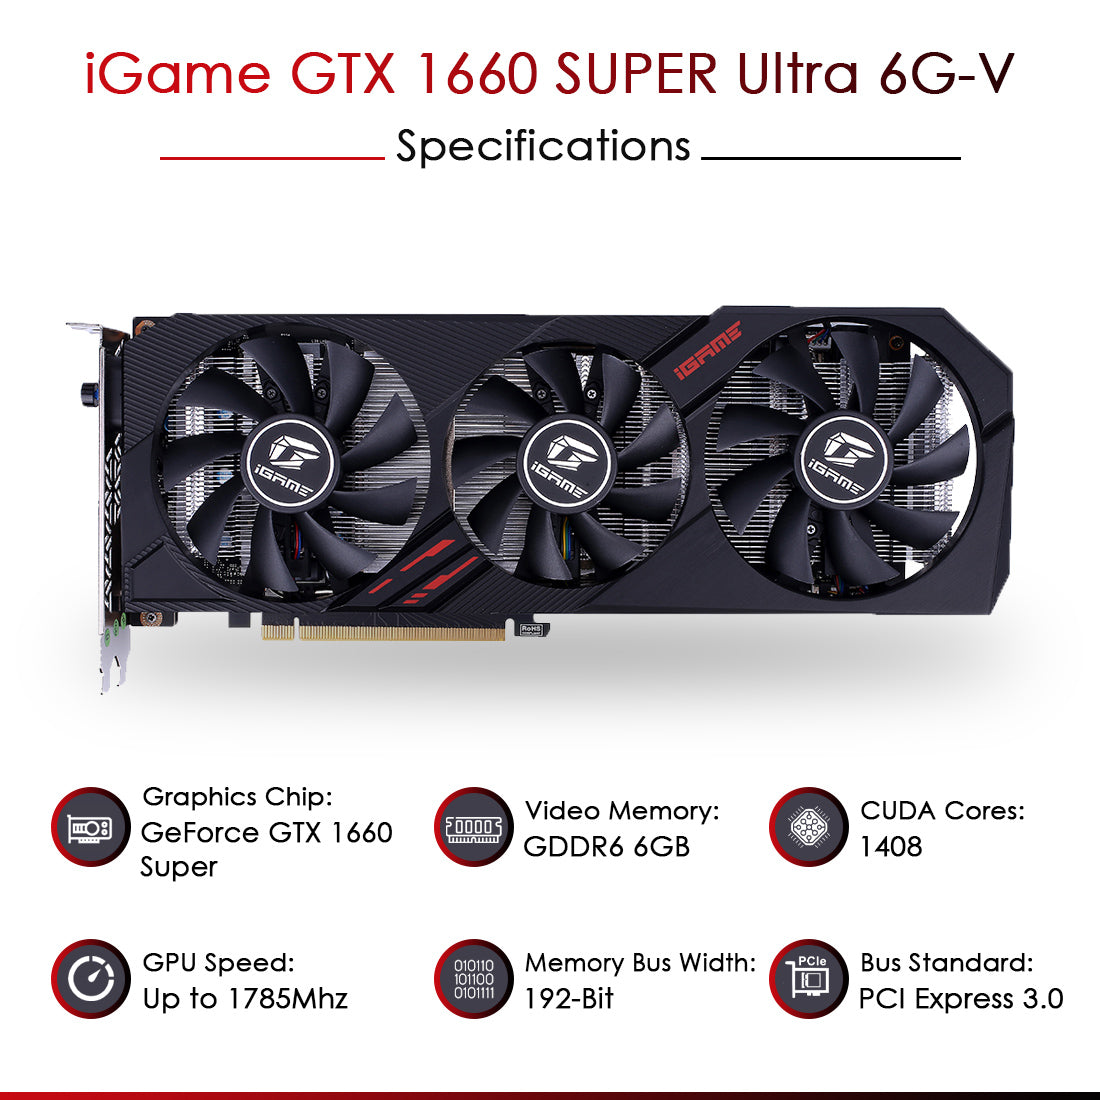 Colorful iGame GeForce GTX 1660 Super Ultra 6G-V 6GB DDR6 Gaming Graphics Card